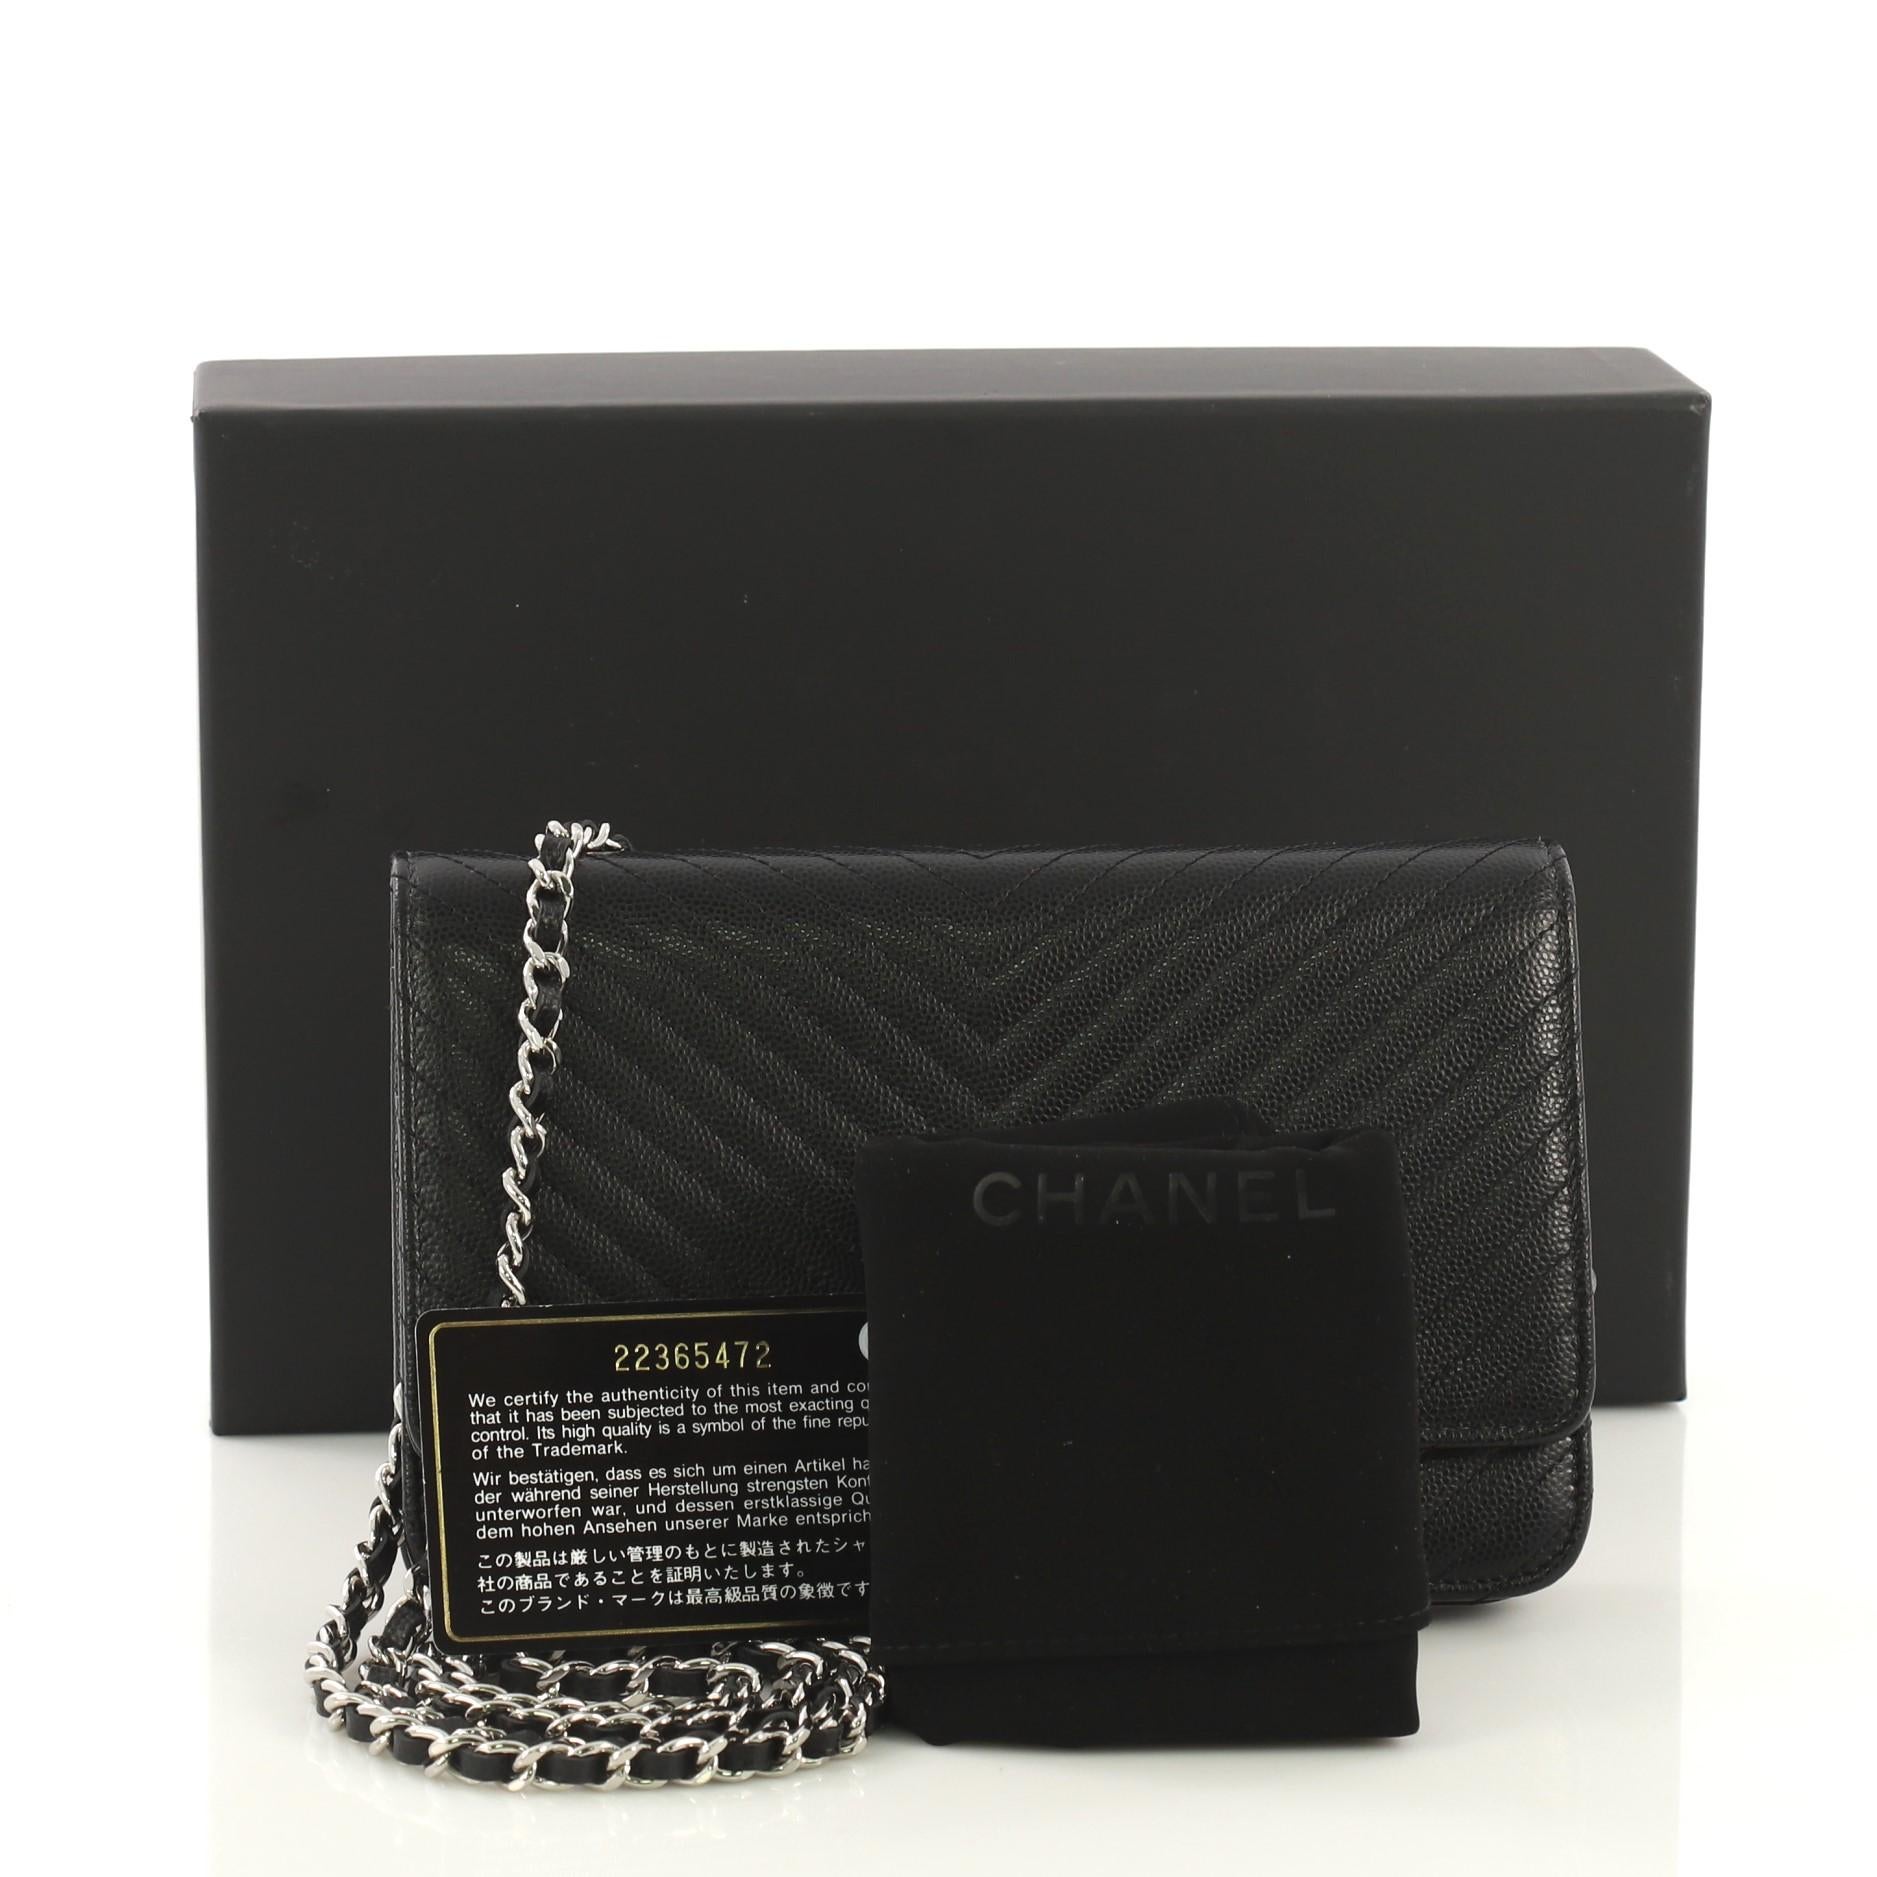 This Chanel Wallet on Chain Chevron Caviar, crafted from black chevron caviar leather, features woven-in leather chain strap, interlocking CC logo on its flap, back slip pocket, and silver-tone hardware. Its hidden snap closure opens to a burgundy